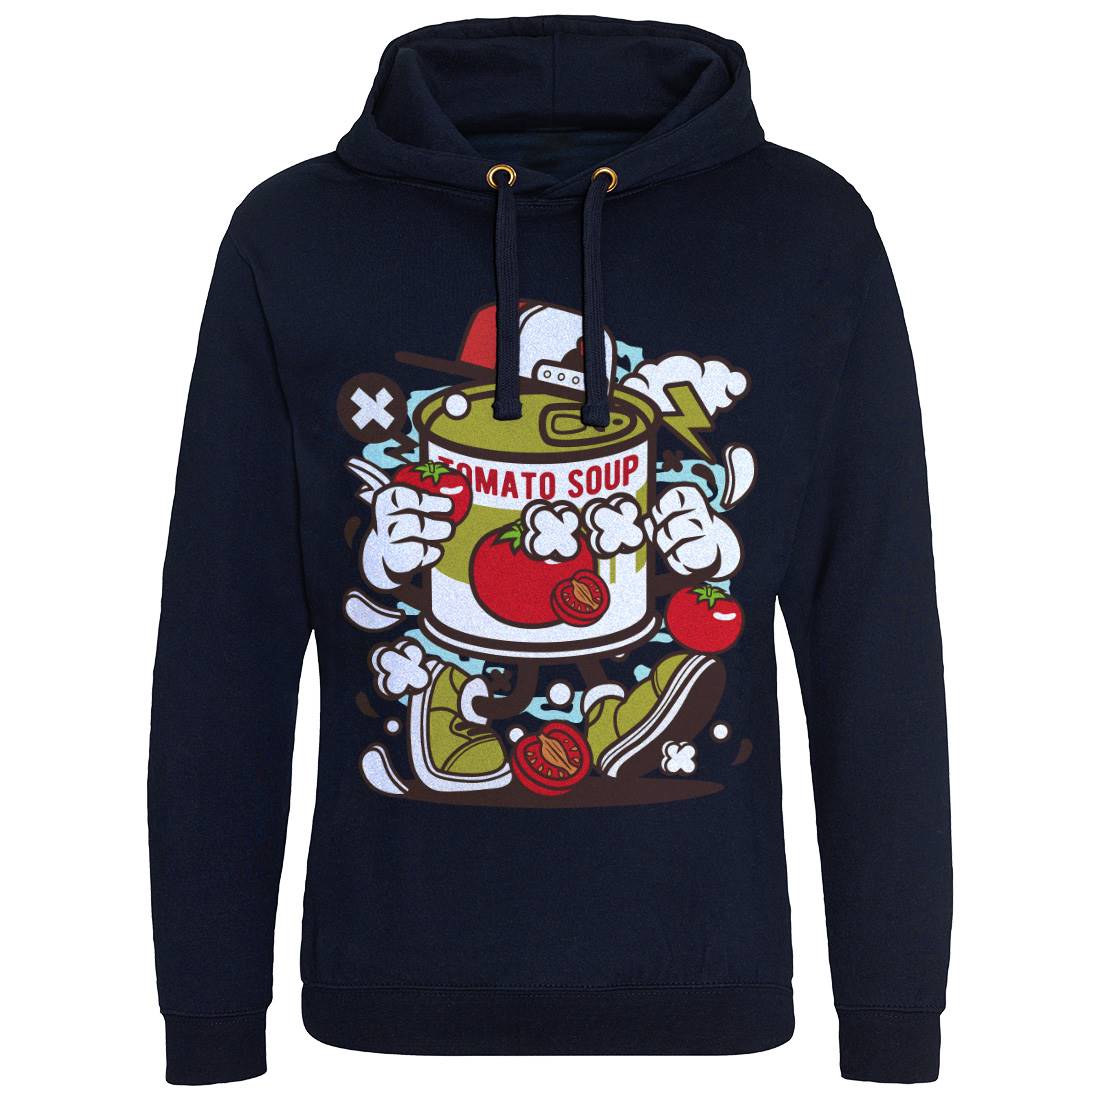 Tomato Soup Mens Hoodie Without Pocket Food C281